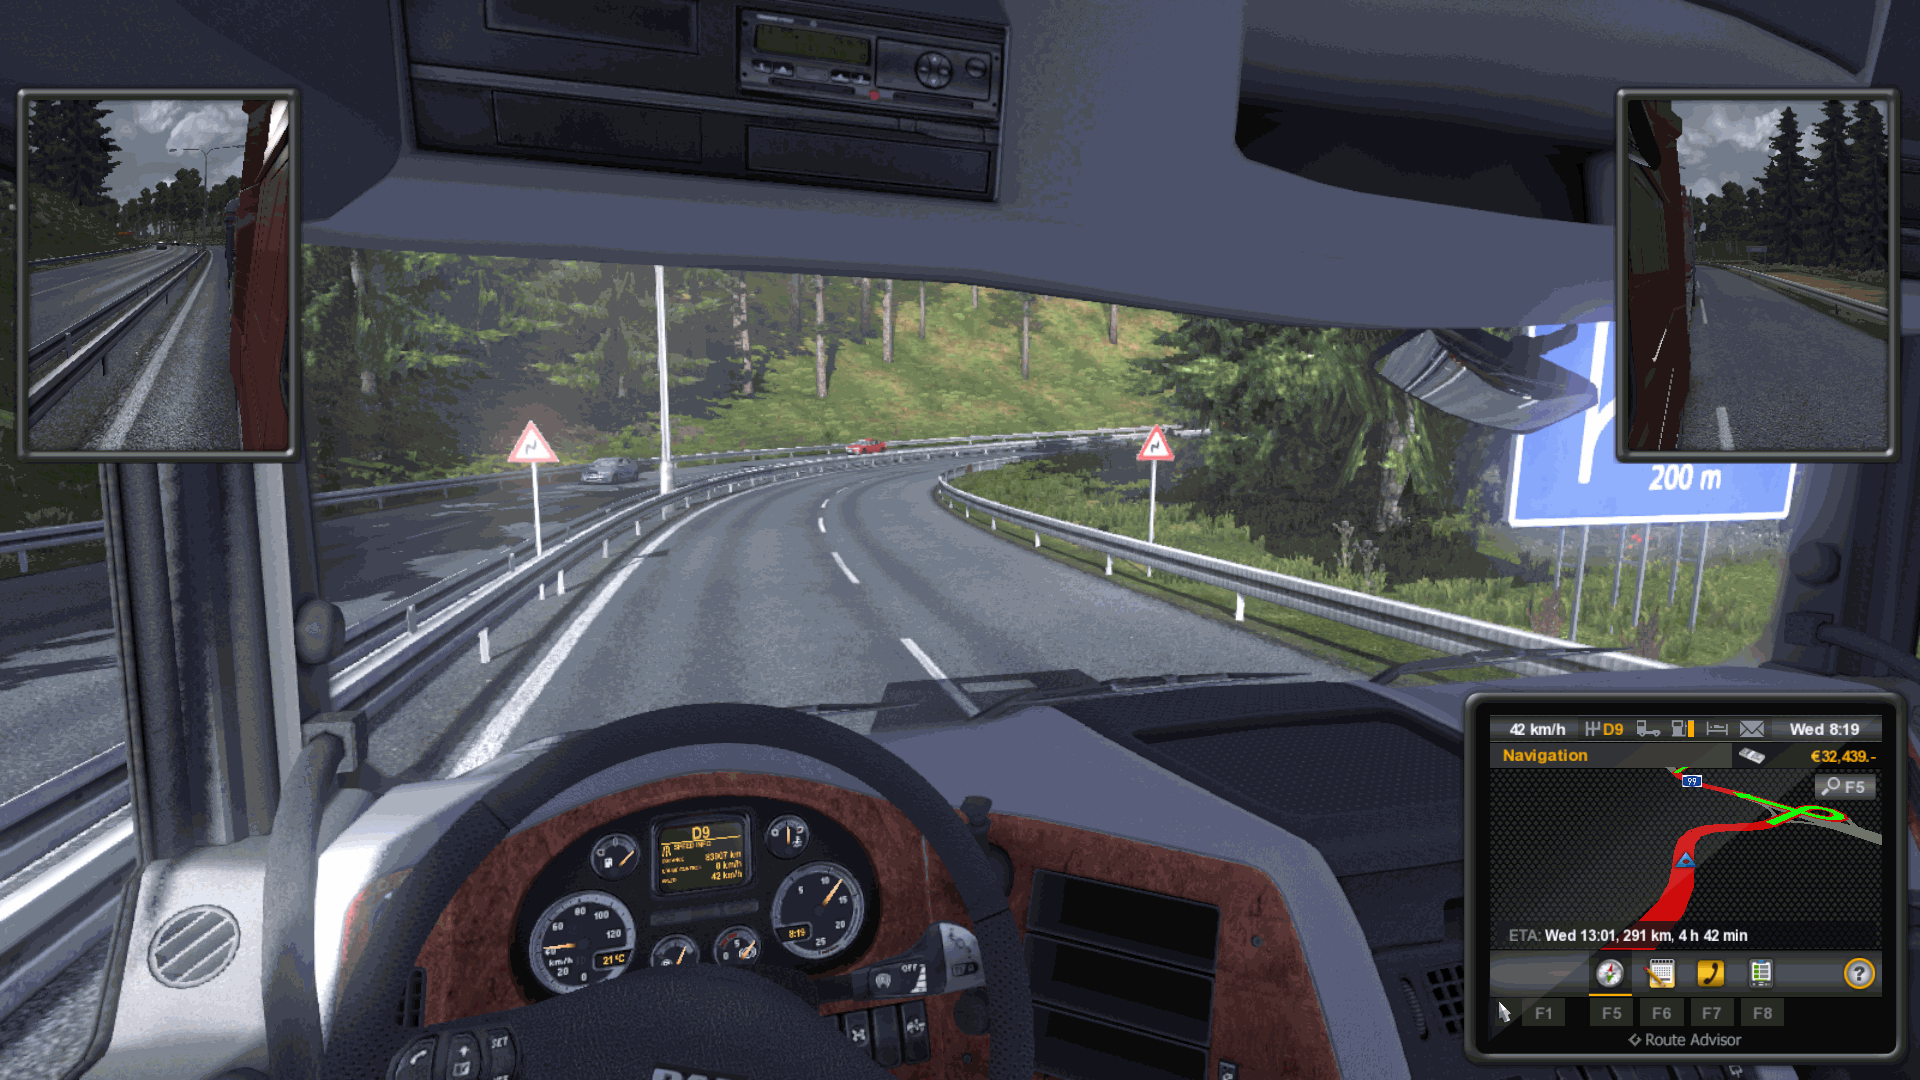 euro bus game download for pc